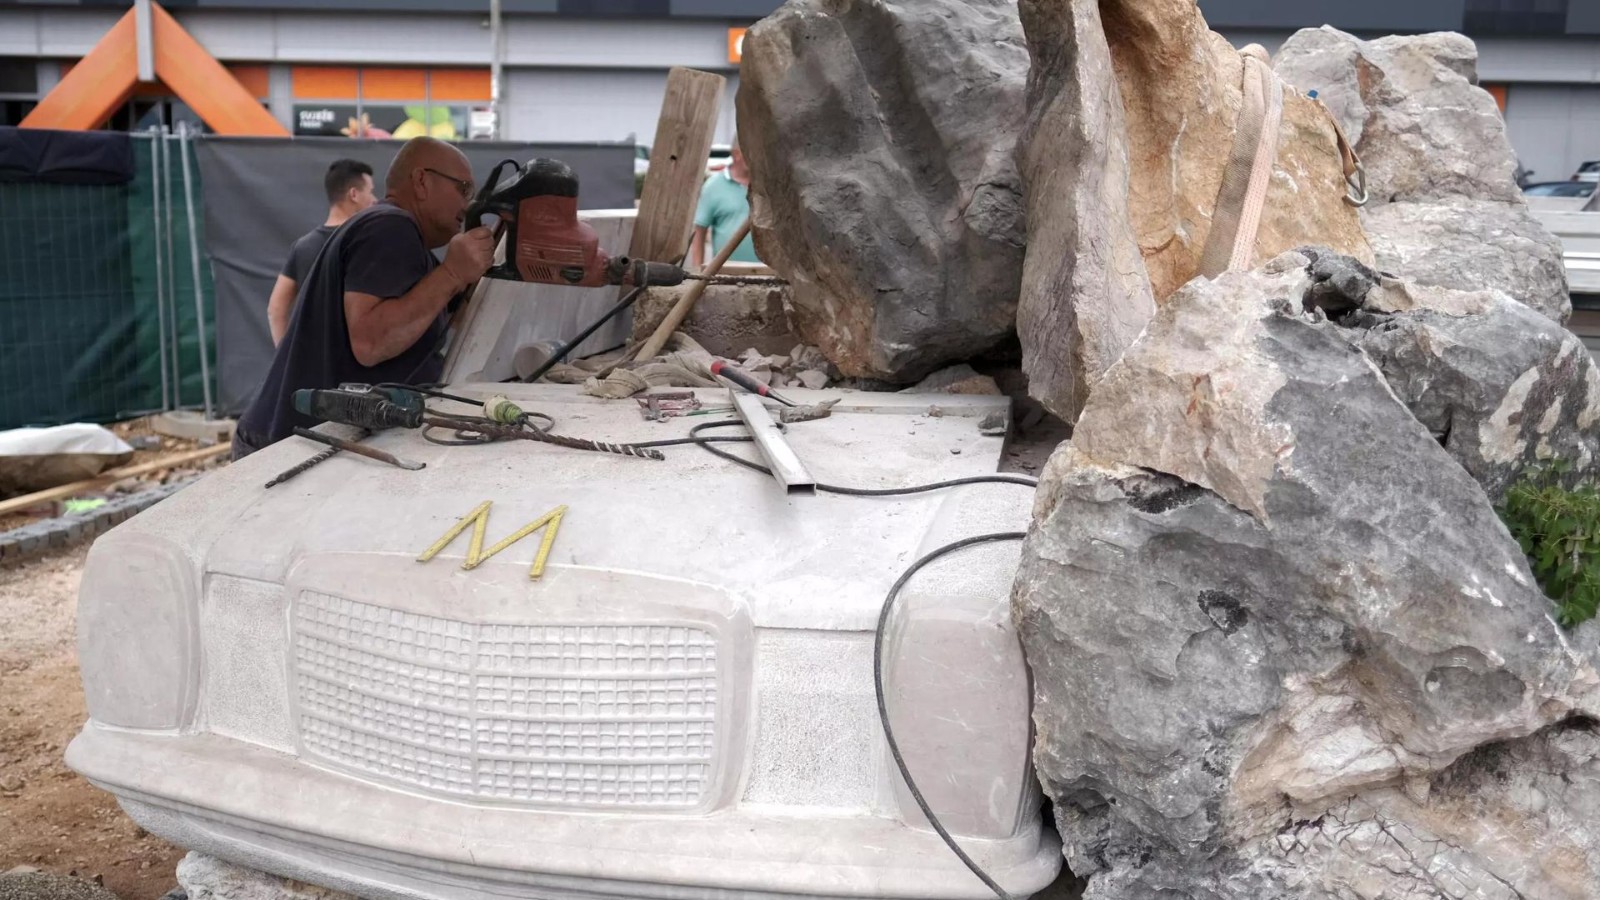 Mislav Rebic works on the Mercedes-Benz statue in the Croatian town of Imotski. /Filip Babic/AFP